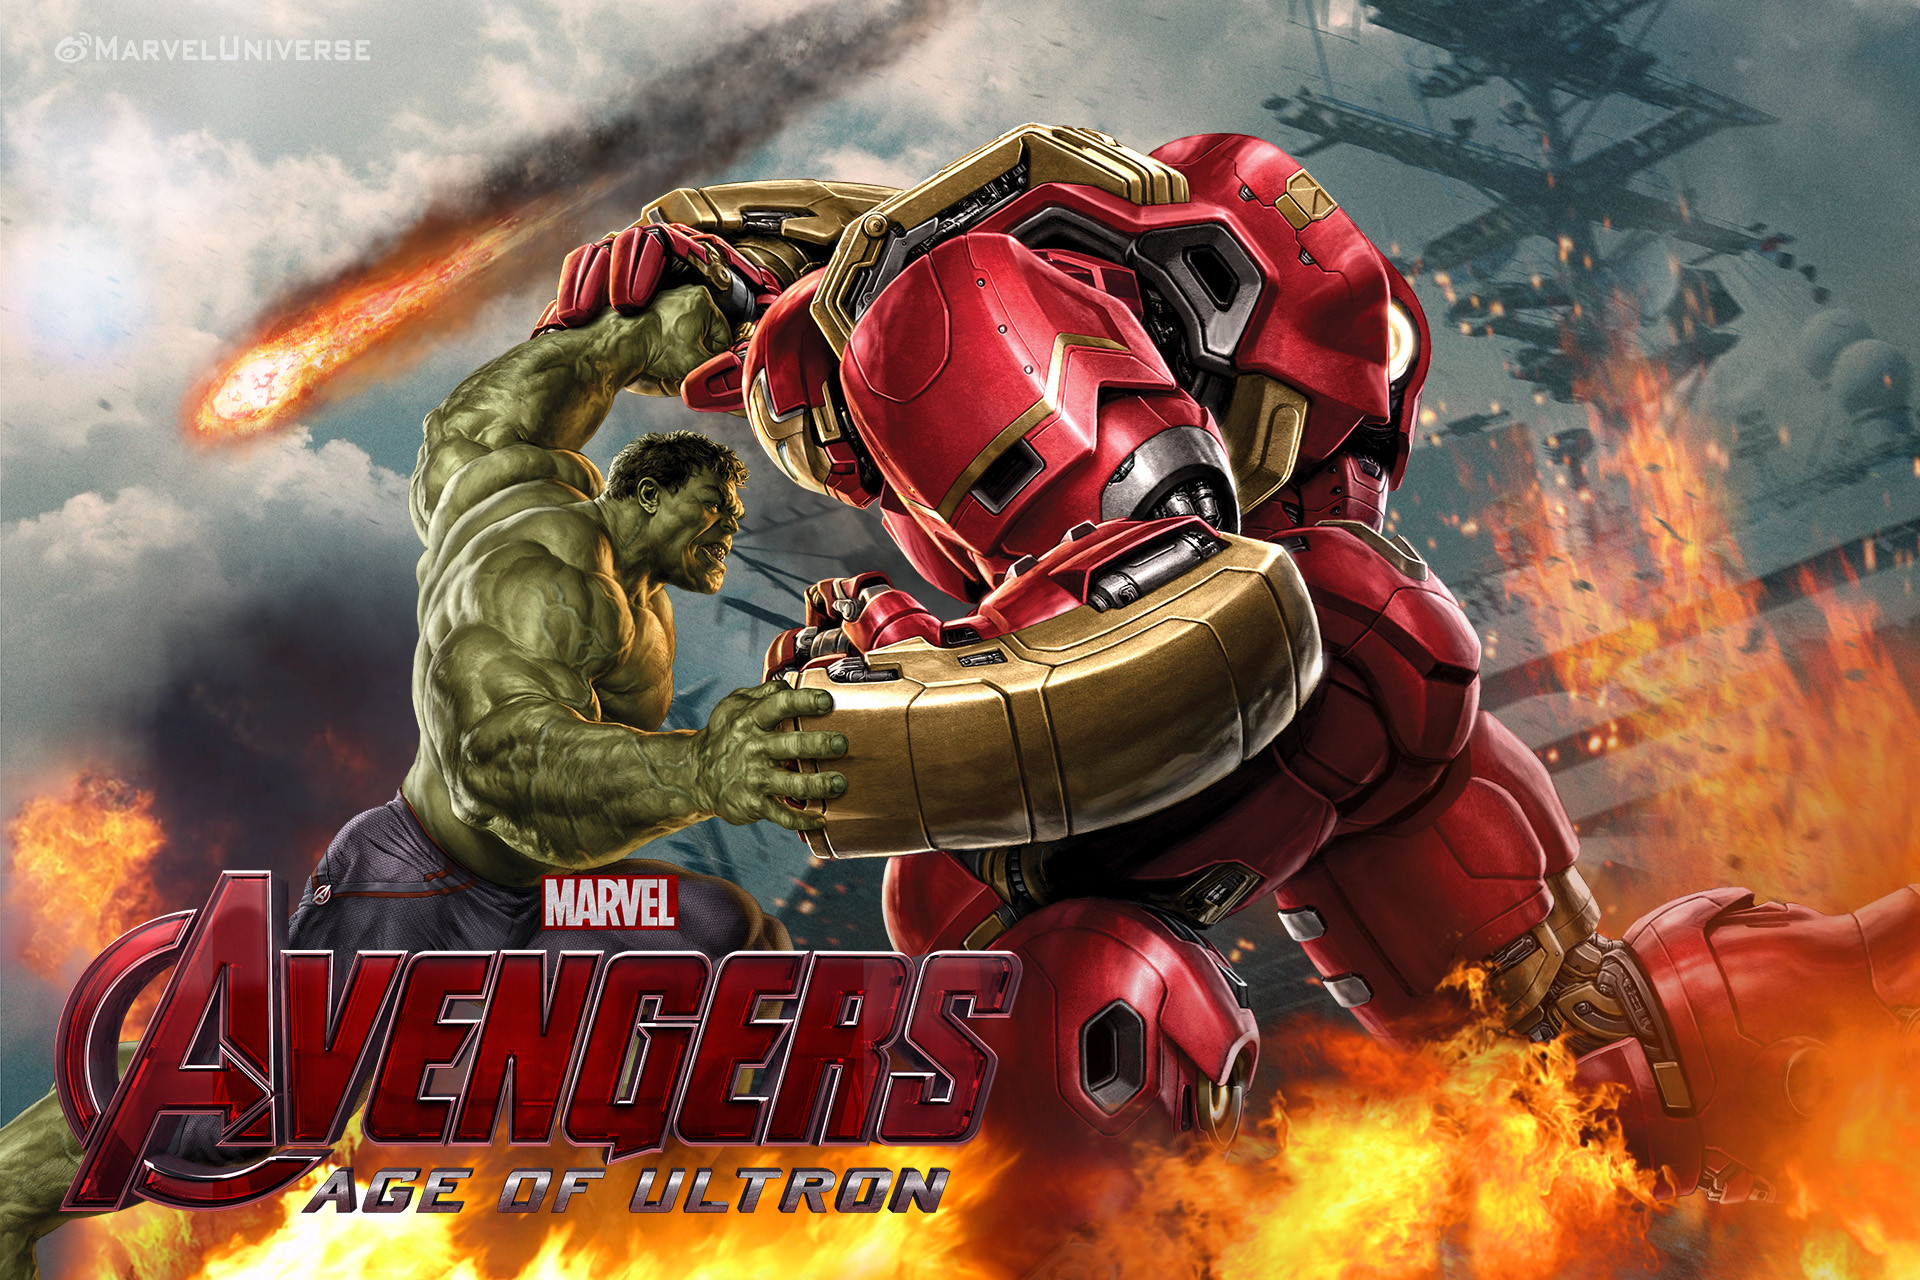 1920x1280 Avengers: Age of Ultron - Hulk with Hulk Buster by Chenshijie9095 on .